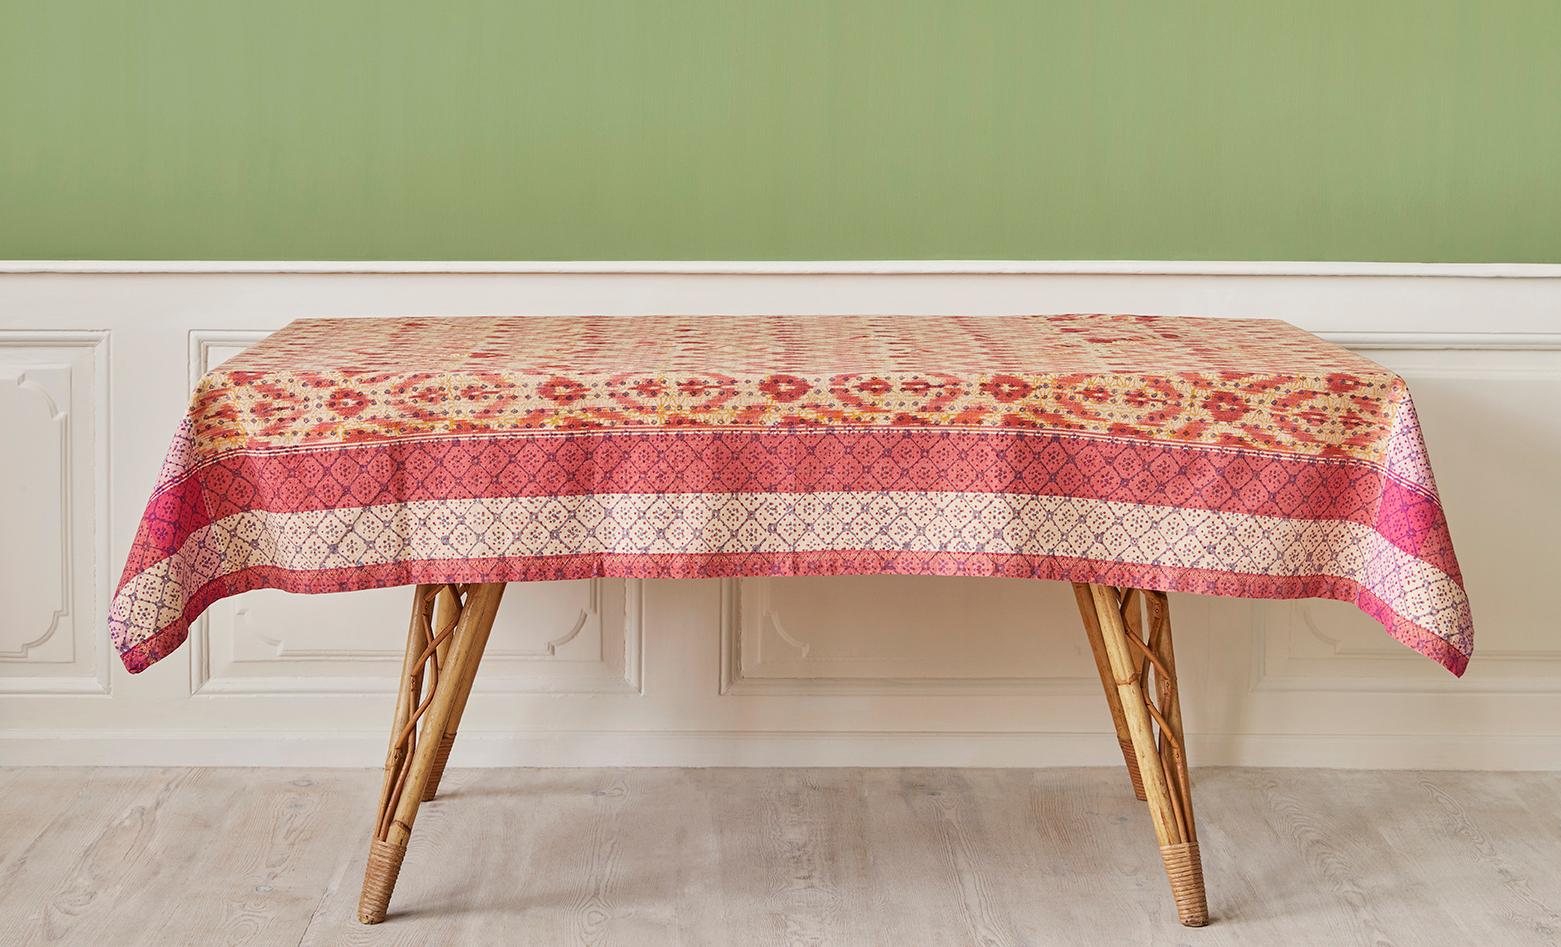 Gregory Parkinson
USA, Contemporary

One of a kind tablecloth with hand-blocked patterns on ikat textile. 

H 200 x W 135 cm